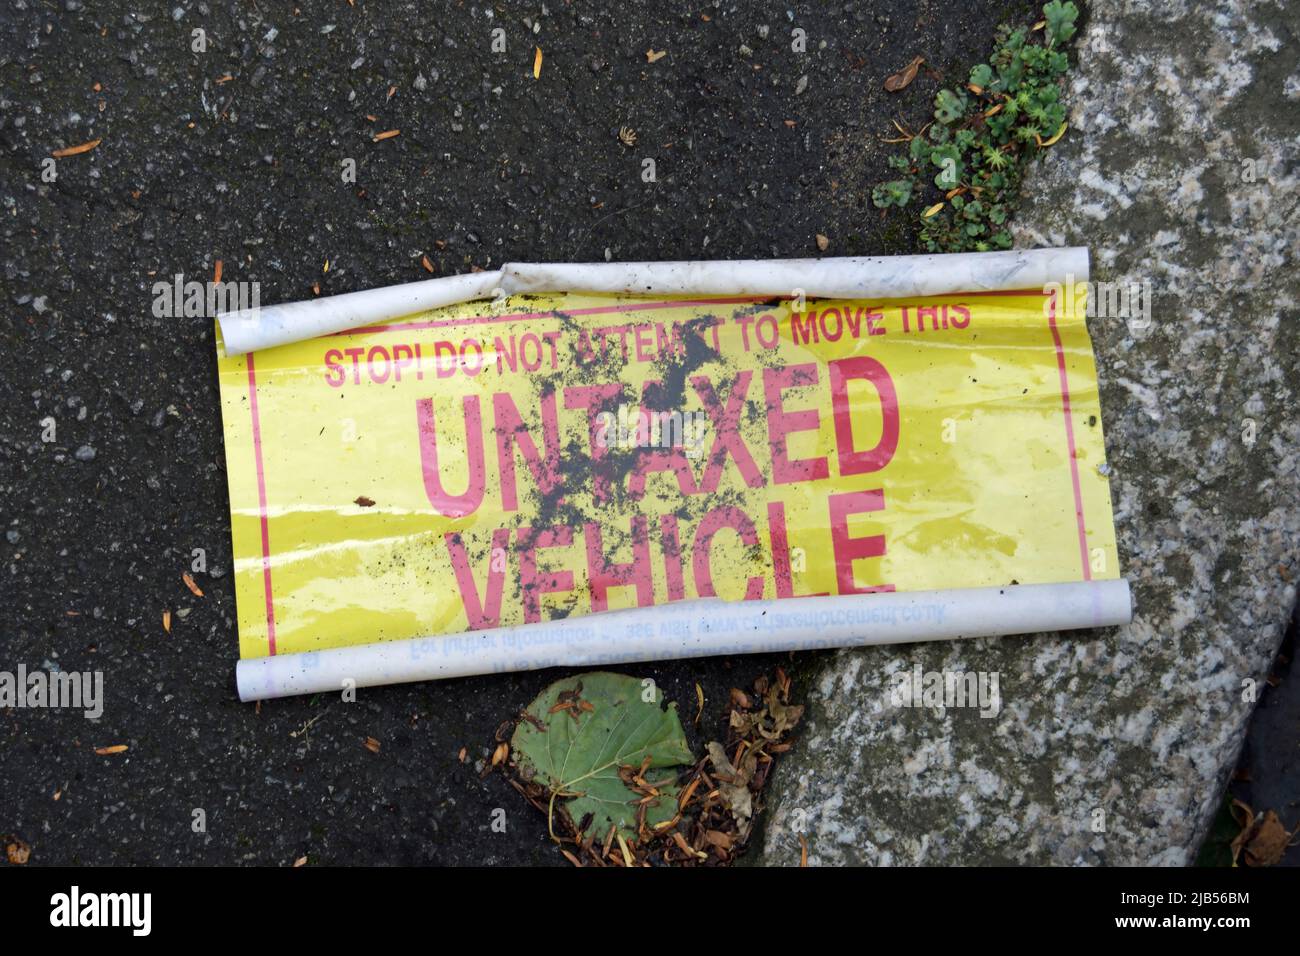 british untaxed vehicle sticker on the ground having been removed from a vehicle despite warning not to remove, twickenham, middlesex, england Stock Photo